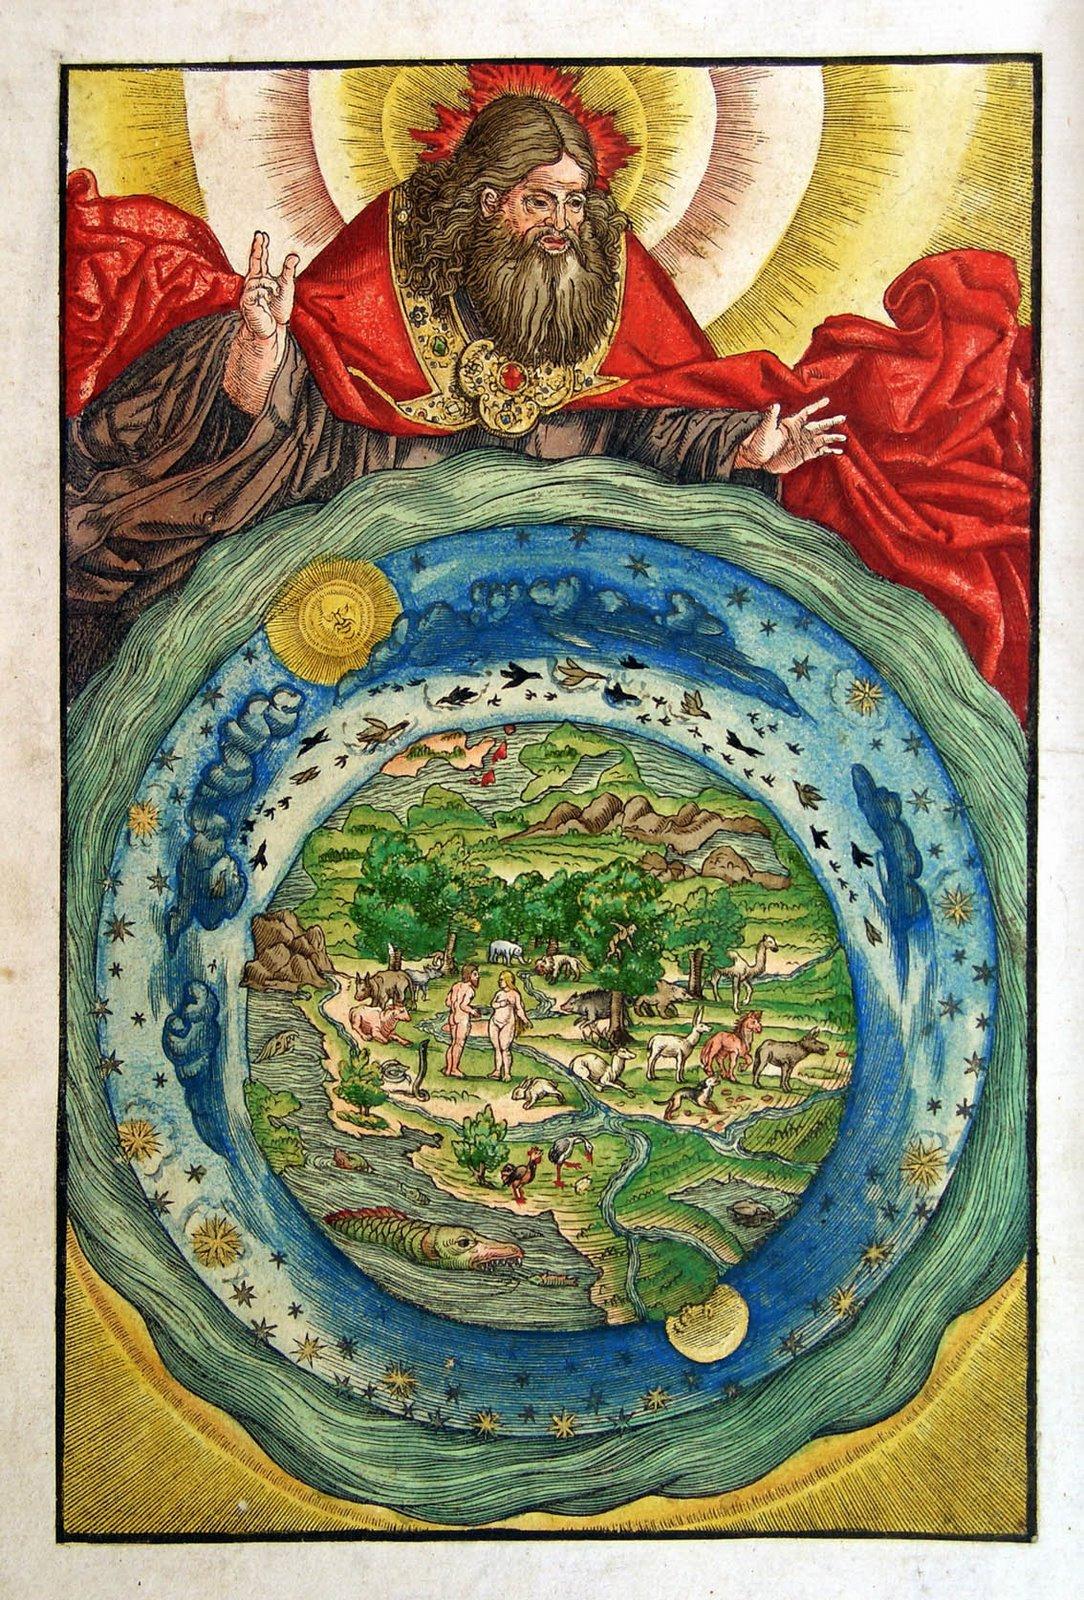 "The Creation," 1534, by Lucas Cranach from Martin Luther's 1534 translation of the Bible. (Public Domain)